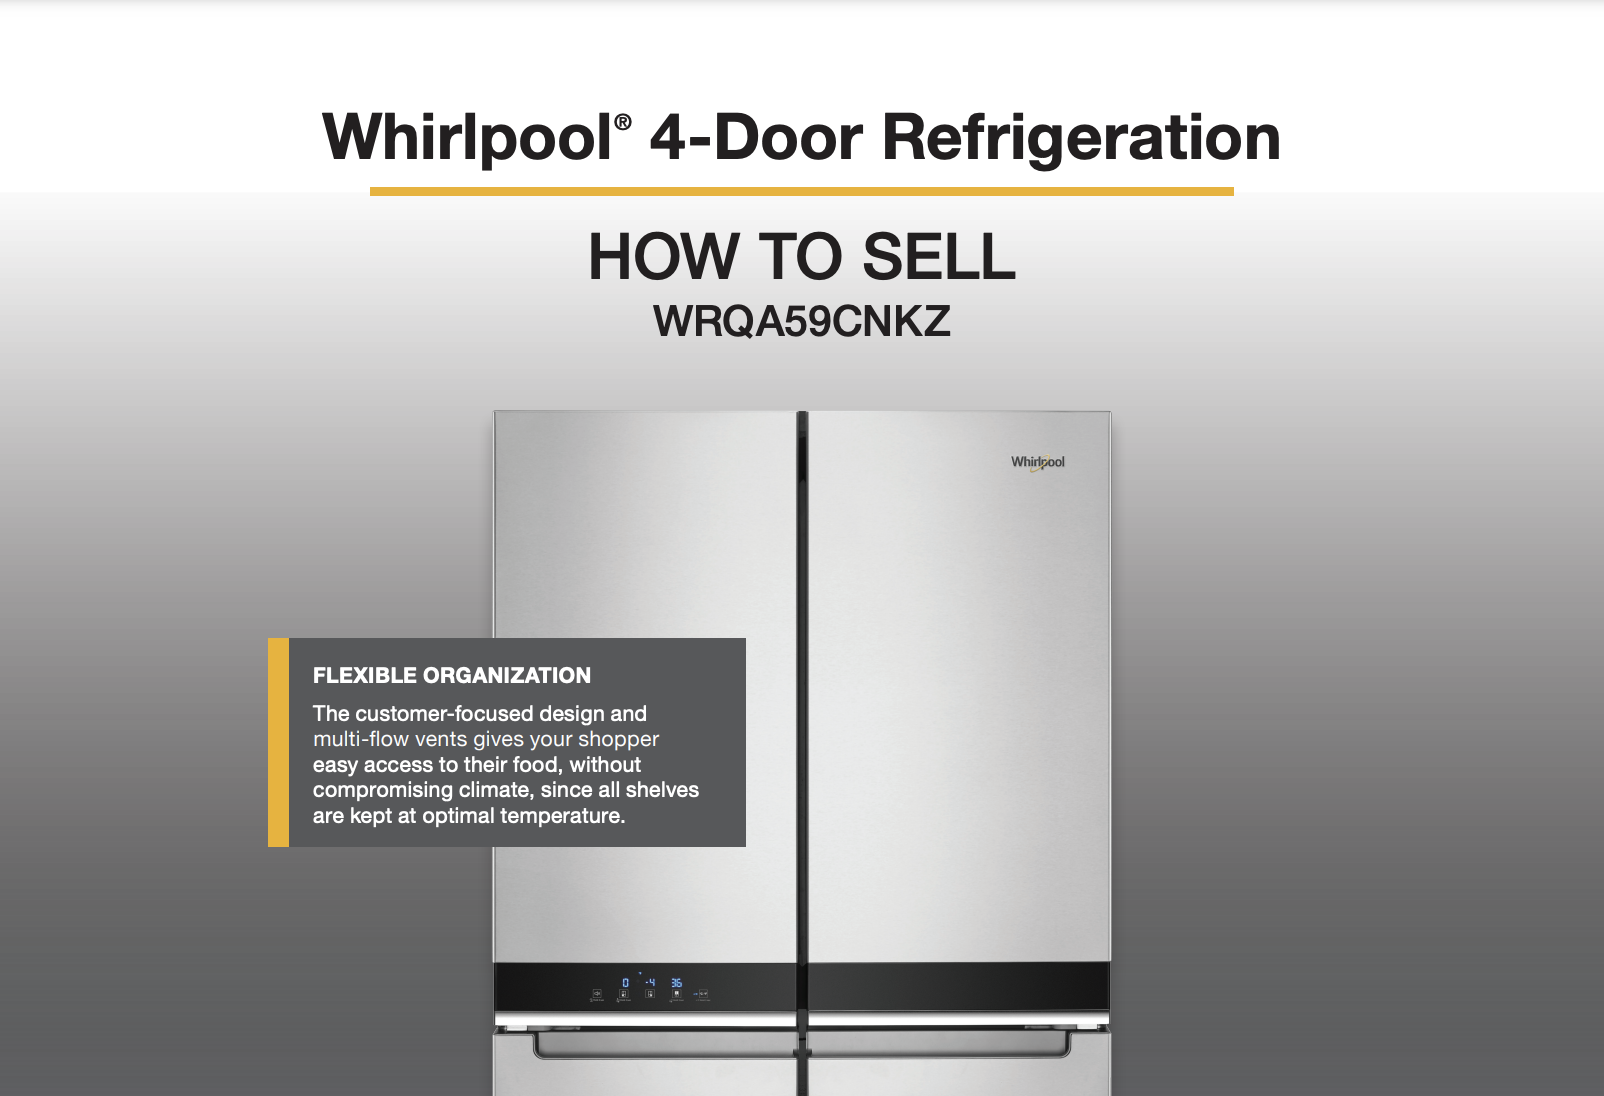 Learn how to discuss this refrigerator, WRQA95CNKZ, with your customers and how it will meet their needs